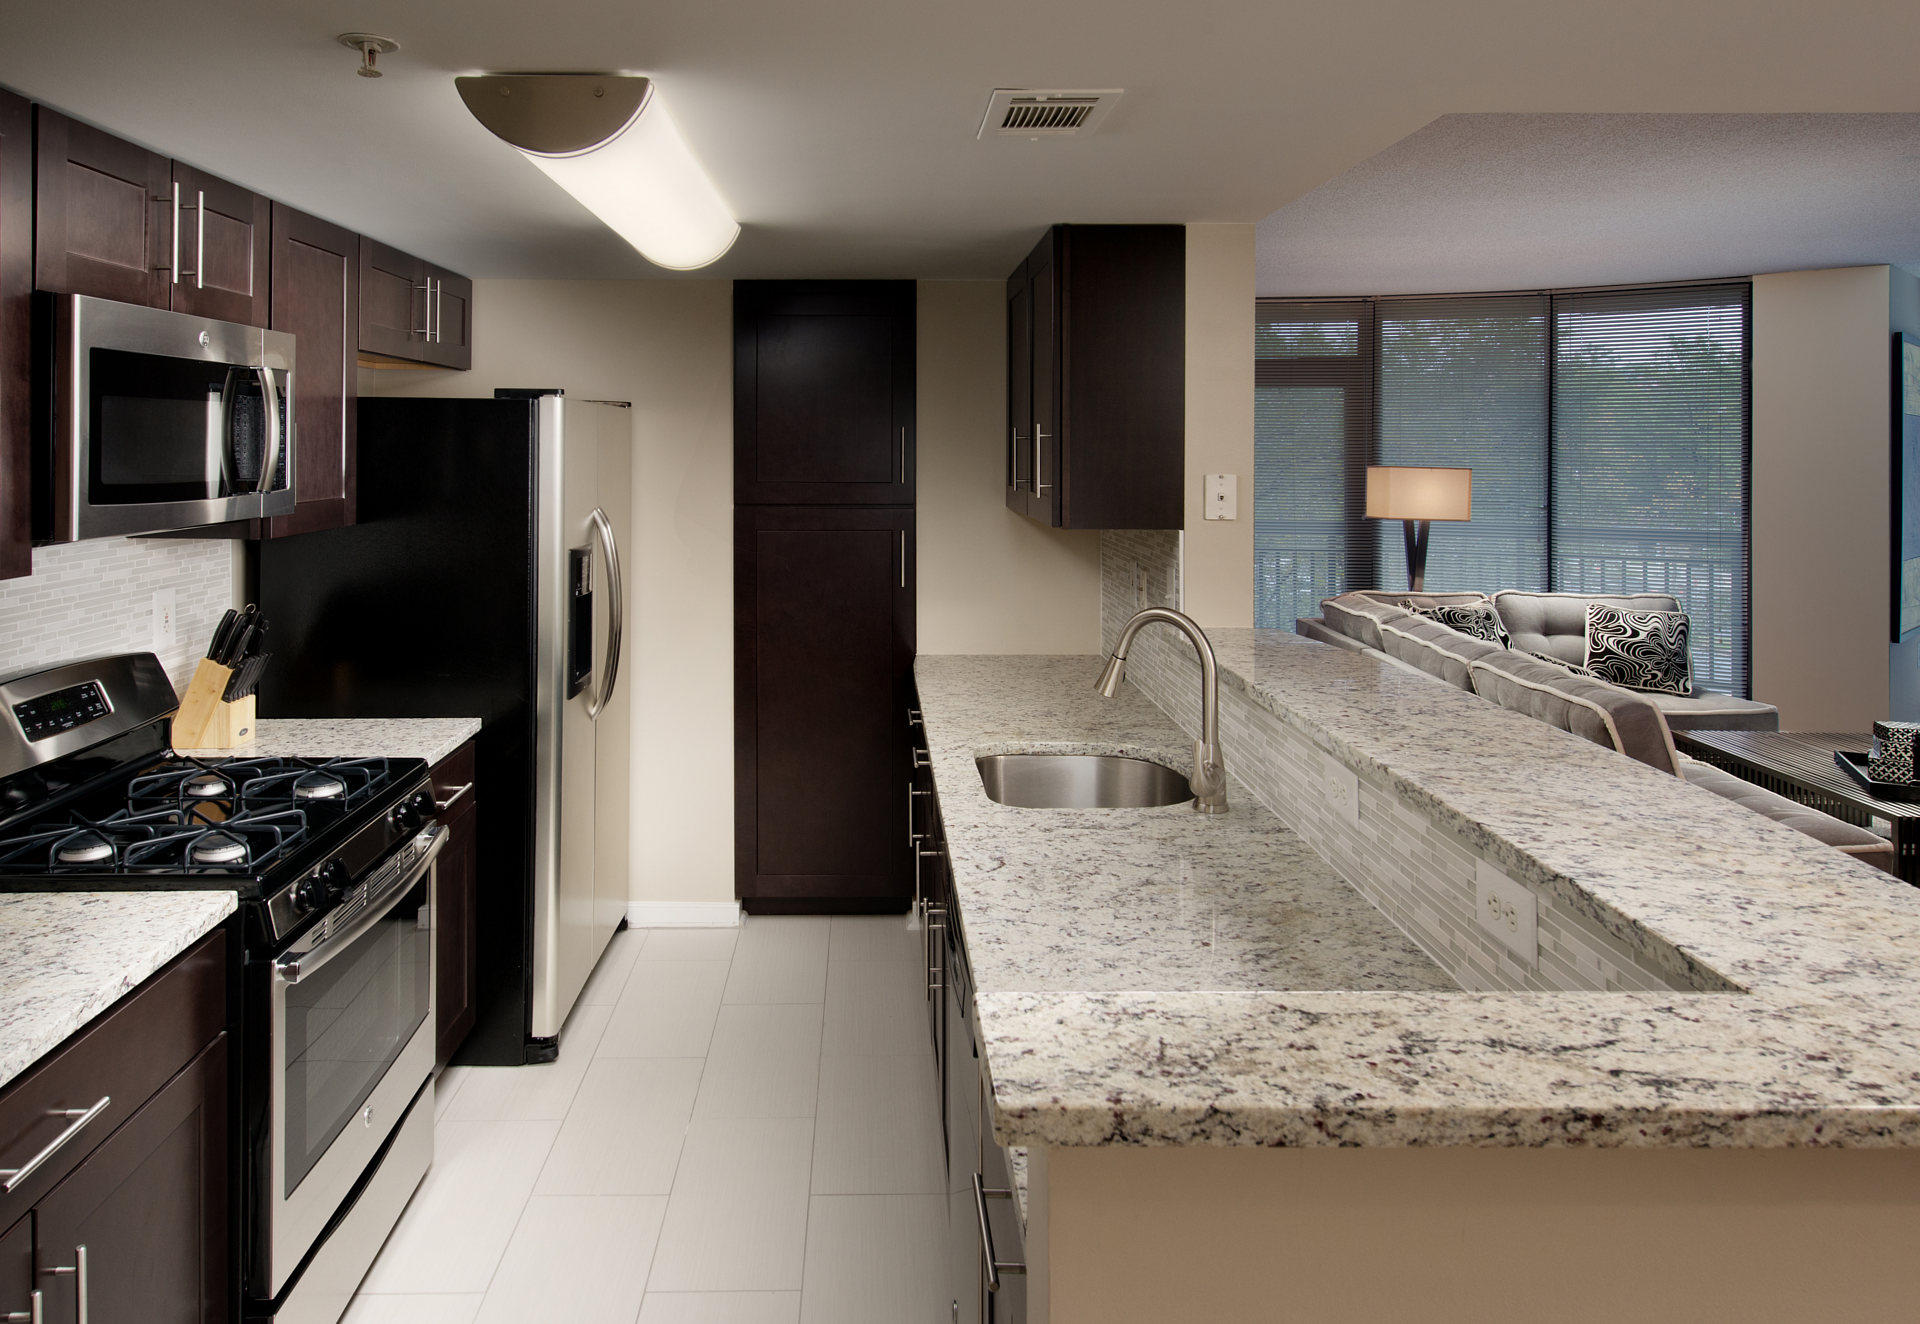 Stainless steel appliances and granite counter tops.